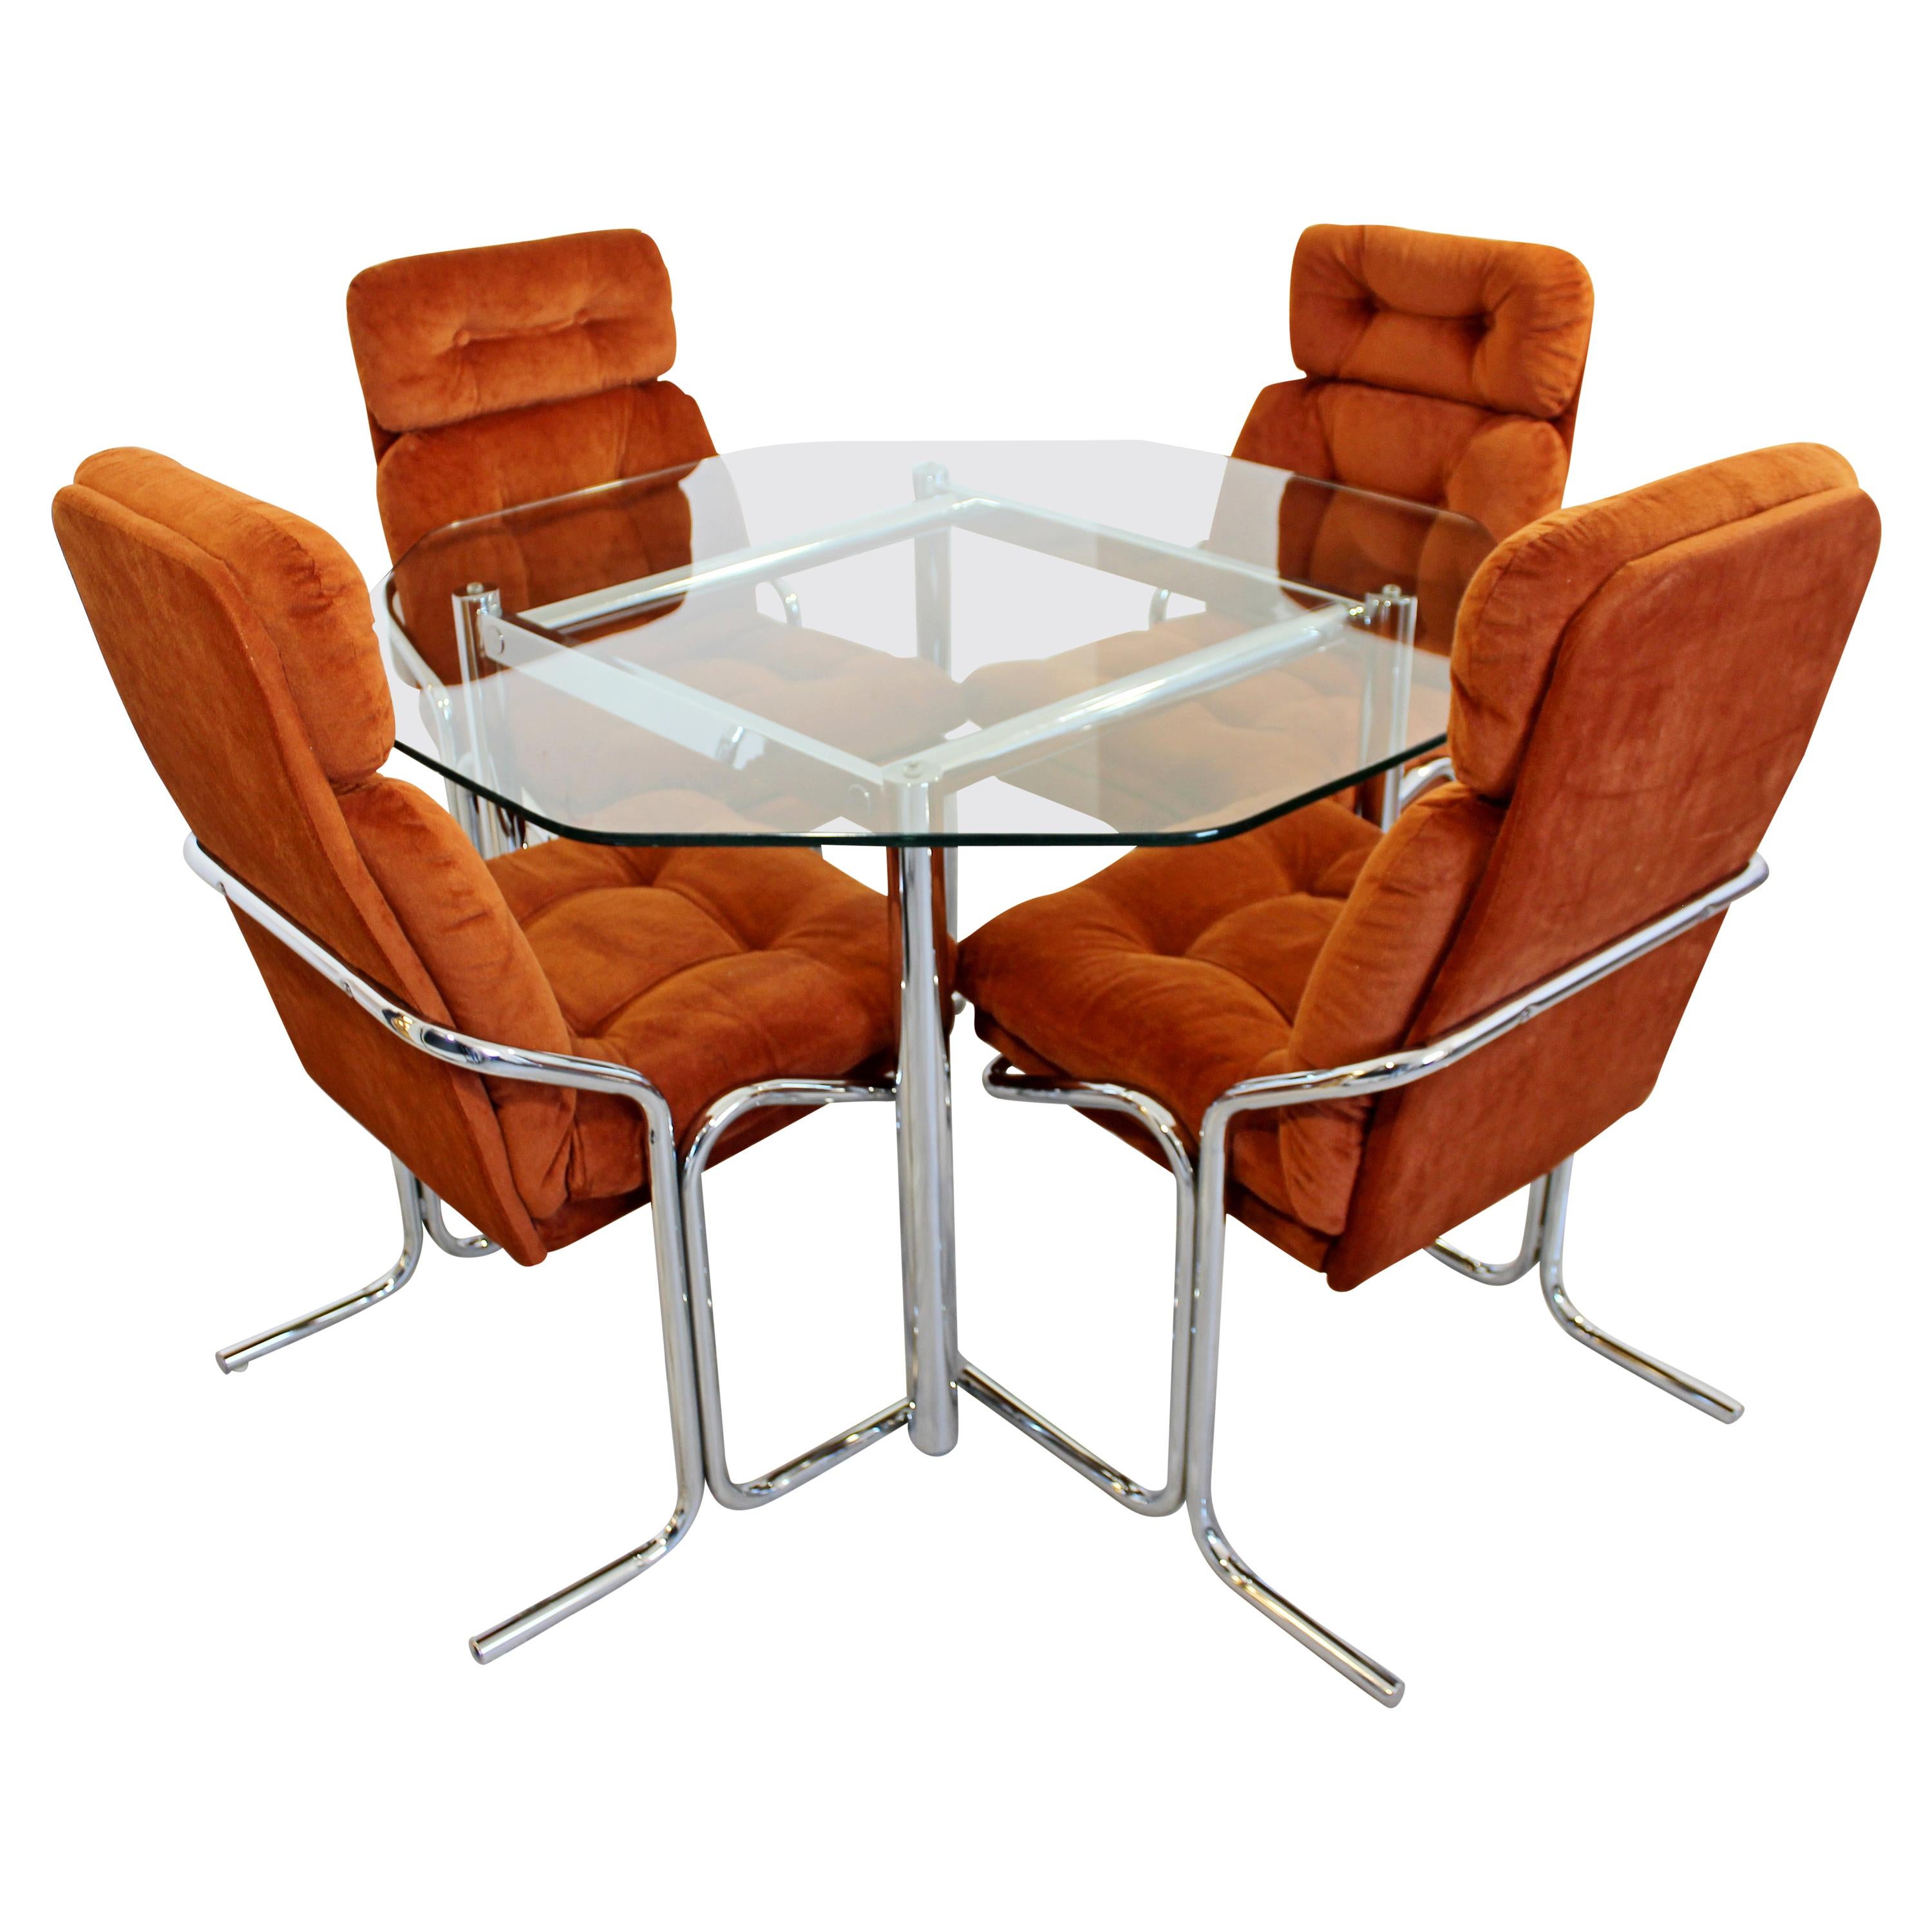 Mid-Century Modern Chrome Dinette Set of 4 Side Chairs Octagon Glass Top Table